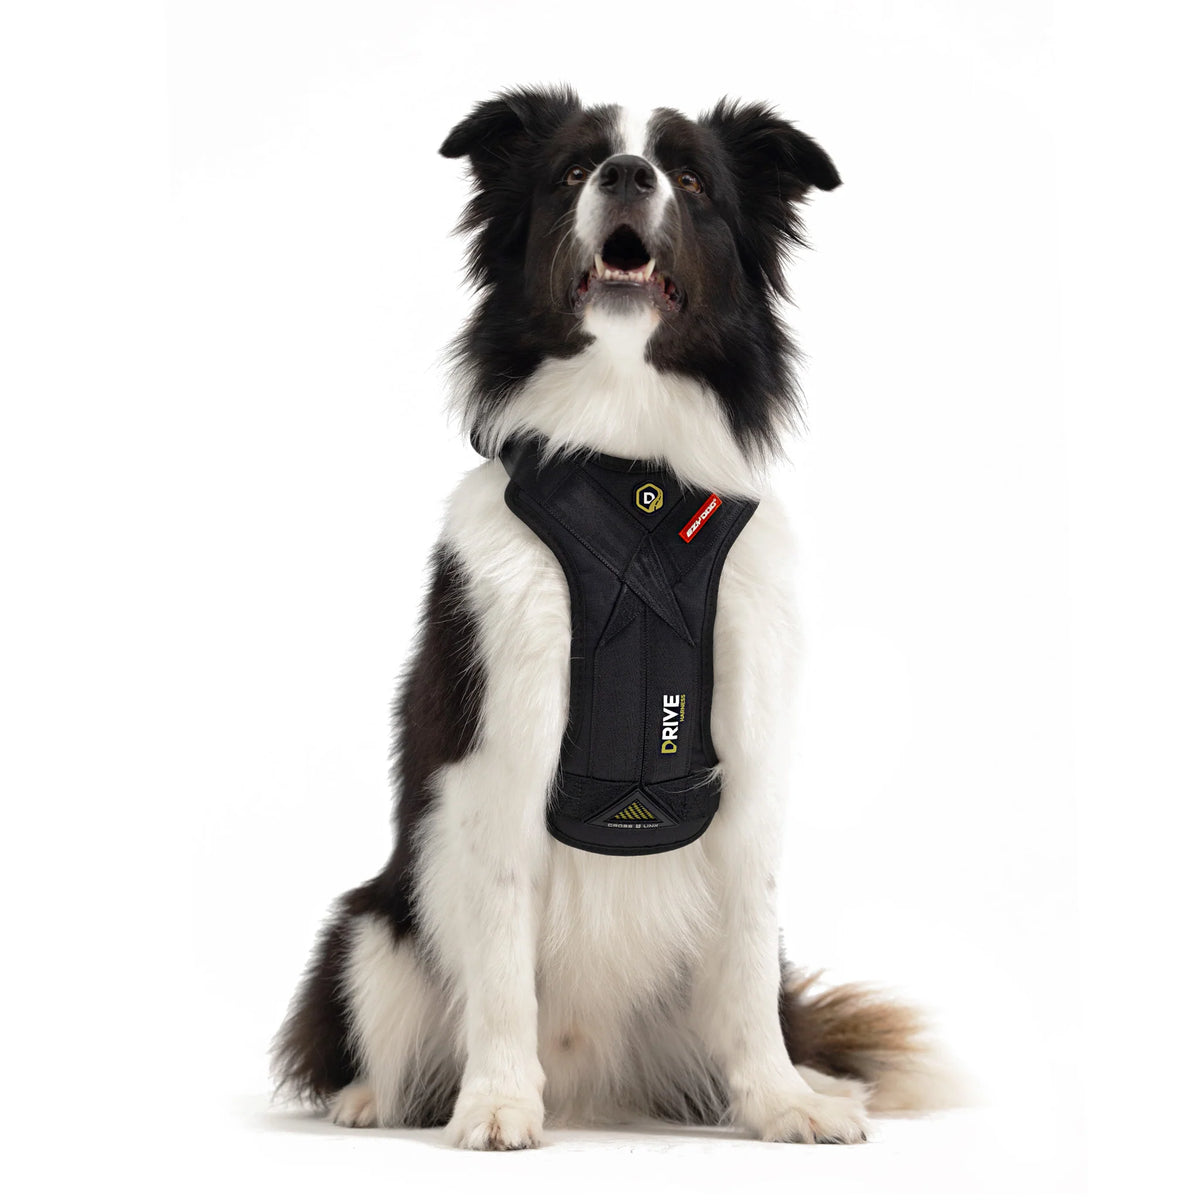 EzyDog Drive Car Safety Harness for Dogs